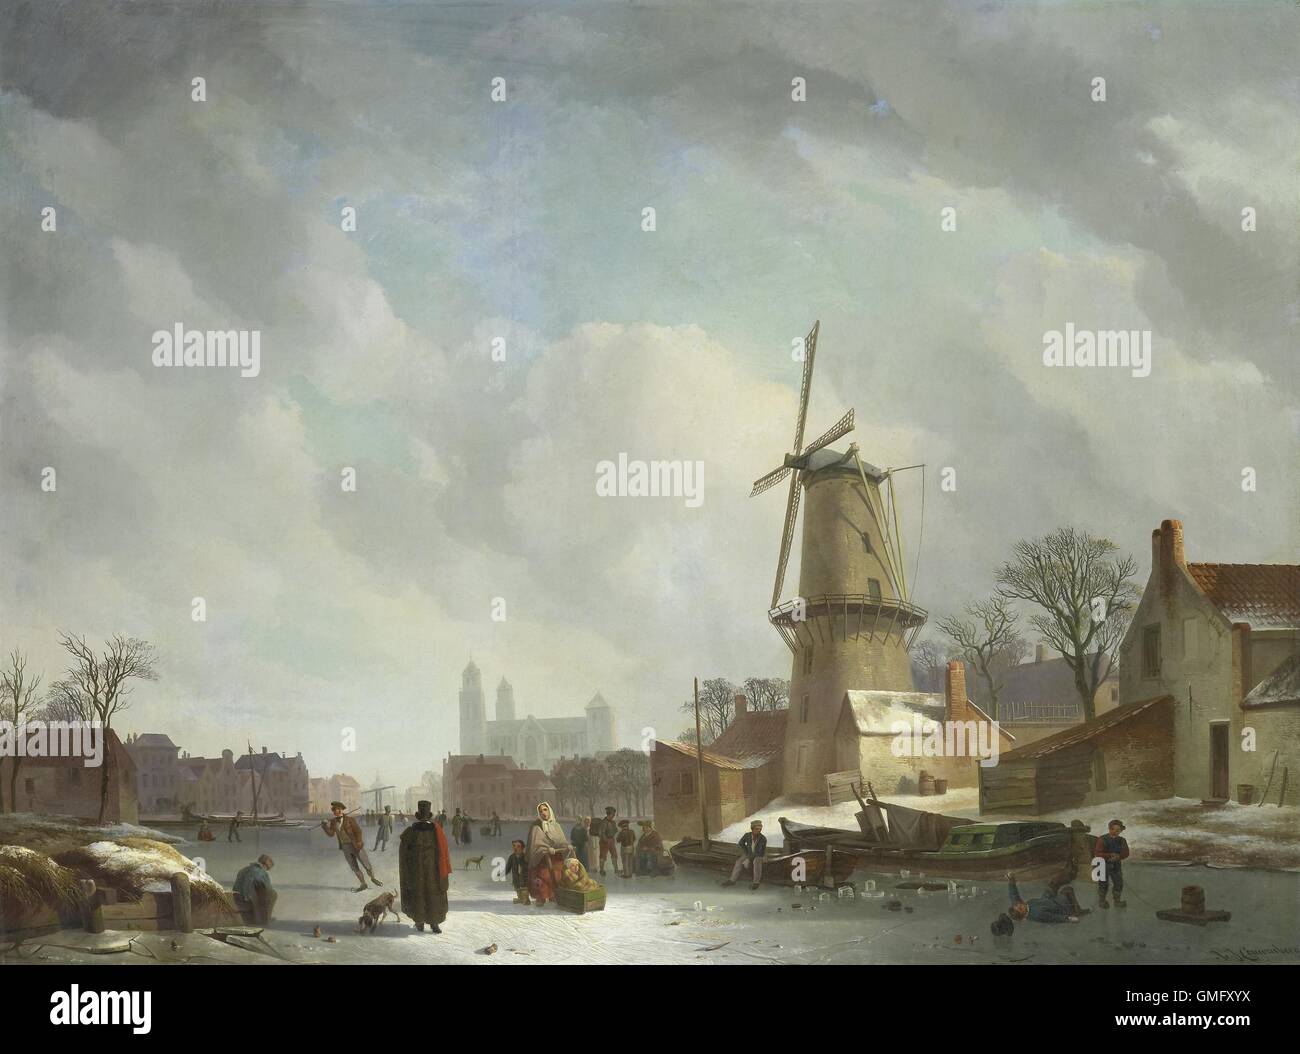 Frolicking on a Frozen Canal in a Town, Abraham Couwenberg, 1830-37, Dutch oil painting on canvas. Men, women, and children walk, push sleds, and skate on ice in winter. Windmill dominates foreground with distant cathedral (BSLOC 2016 2 5) Stock Photo